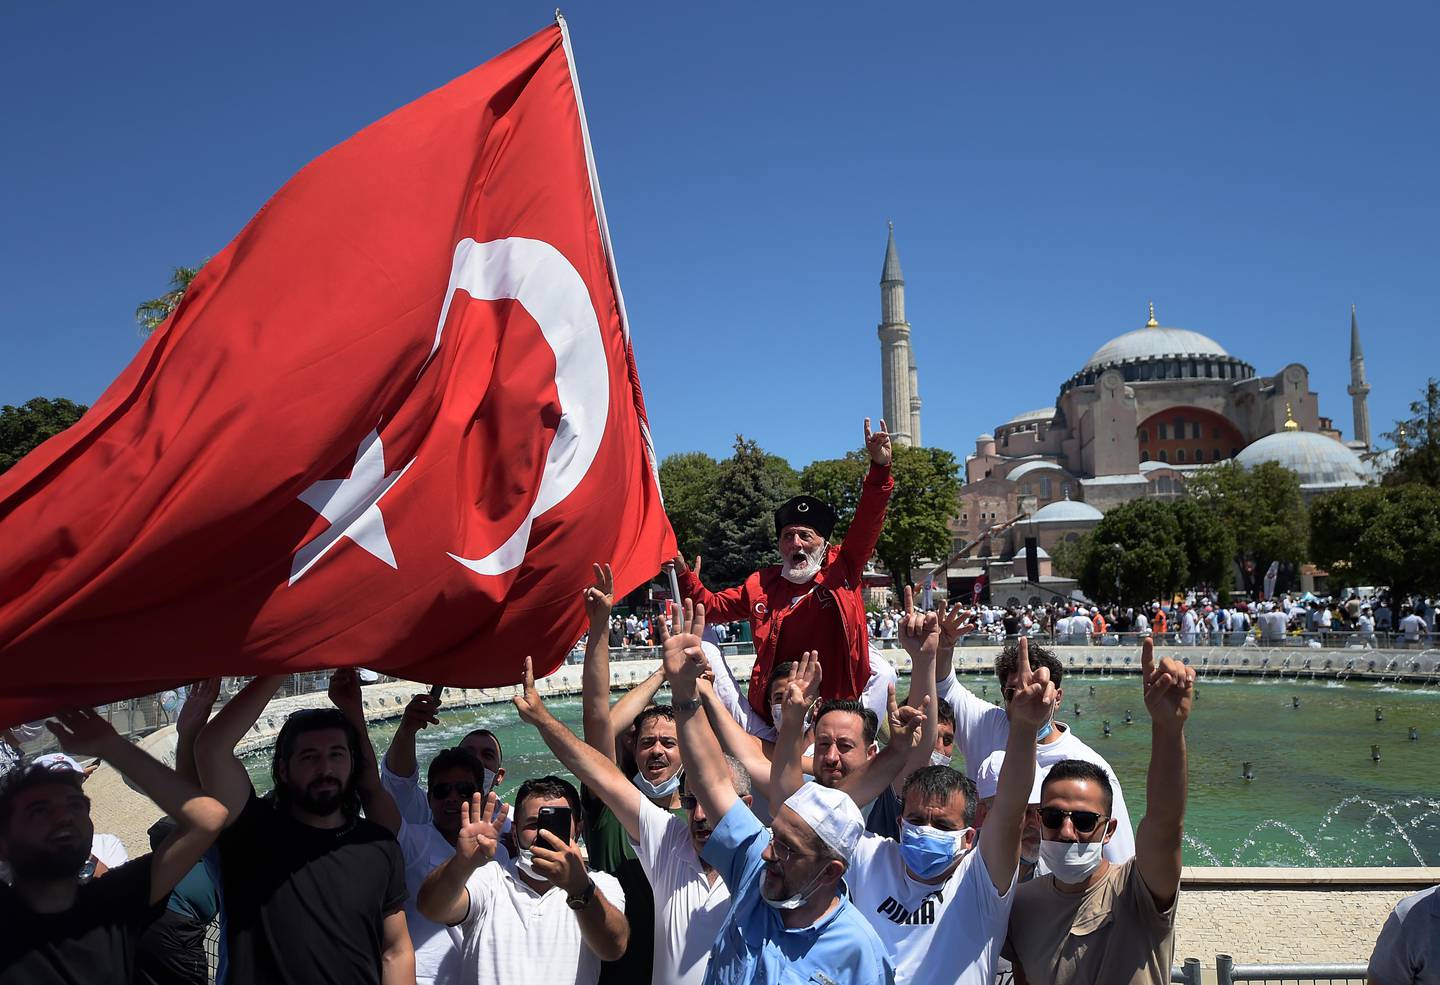 Faithful, one holding a Turkish flag, chant slogans as they wait at the historic Sultanahmet district of Istanbul, outside the Byzantine-era Hagia Sophia, Friday, July 24, 2020. Hundreds of Muslim faithful were making their way to Istanbul's landmark monument Friday to take part in the first prayers in 86 years at the structure that was once Christendom's most significant cathedral and the "jewel" of the Byzantine Empire then a mosque and museum before its re-conversion into a Muslim place of worship. The conversion of the edifice, has led to an international outcry. (AP Photo/Yasin Akgul)